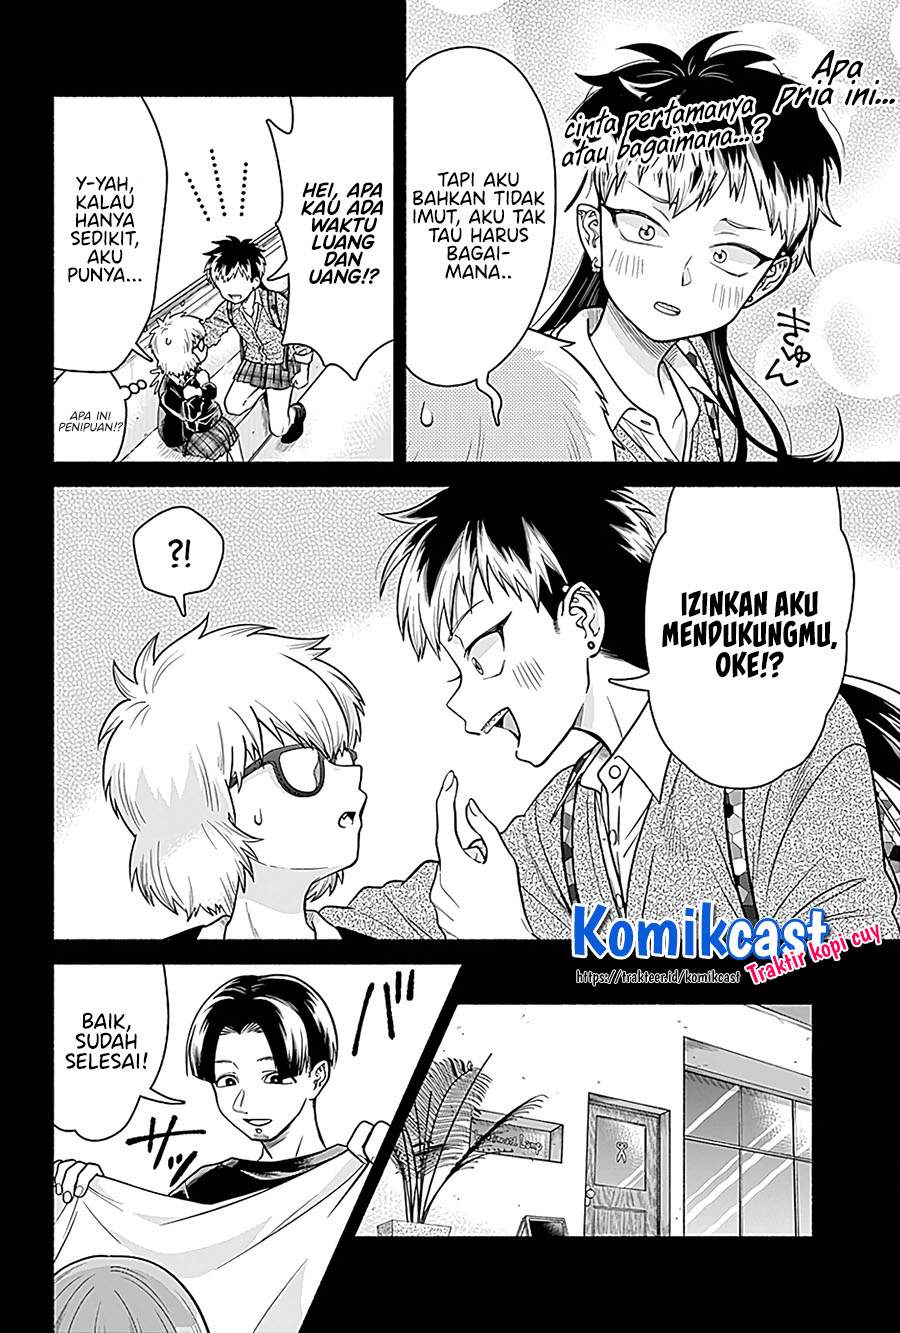 Marriage Gray Chapter 04